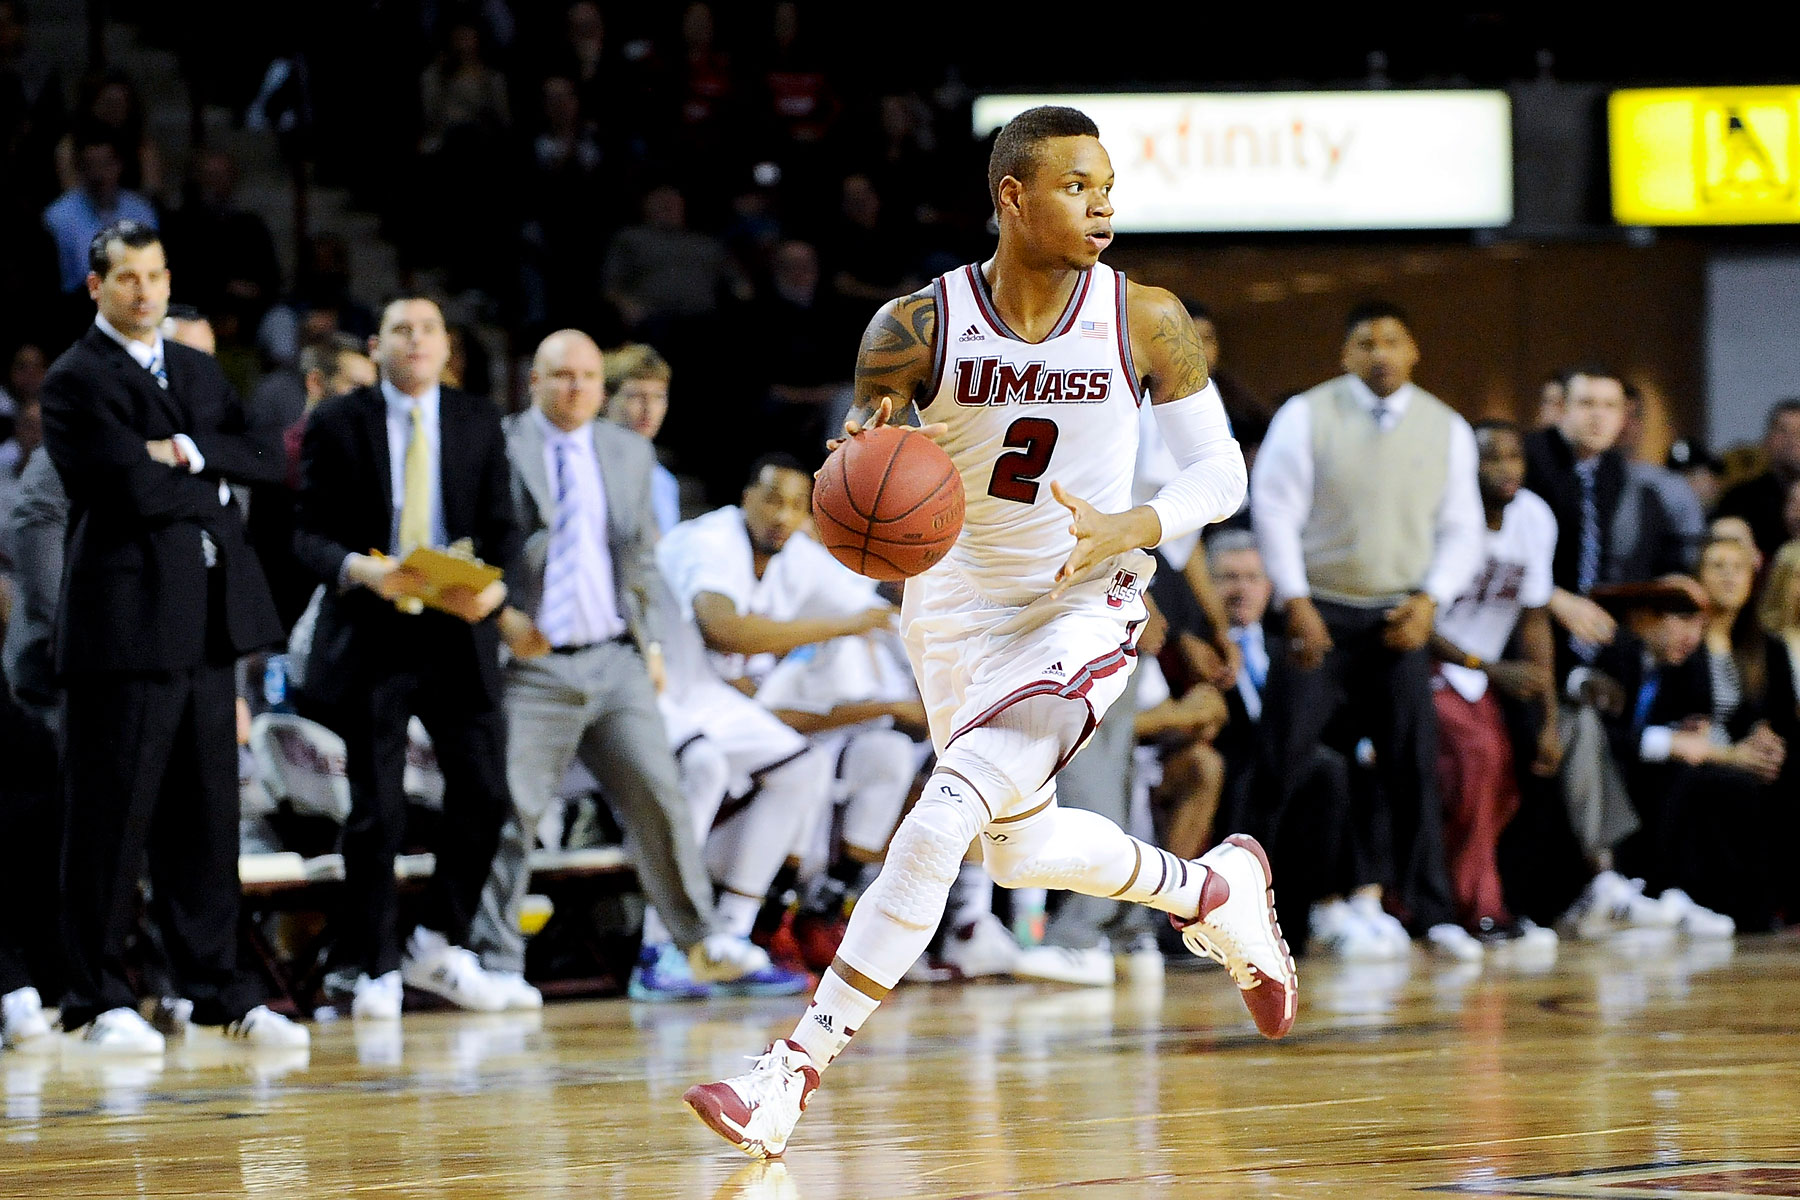 UMass guard Derrick Gordon dribbles the ball during a game against the Fordham Rams at the Mullin Center in Amherst, Mass., Jan. 26, 2014.